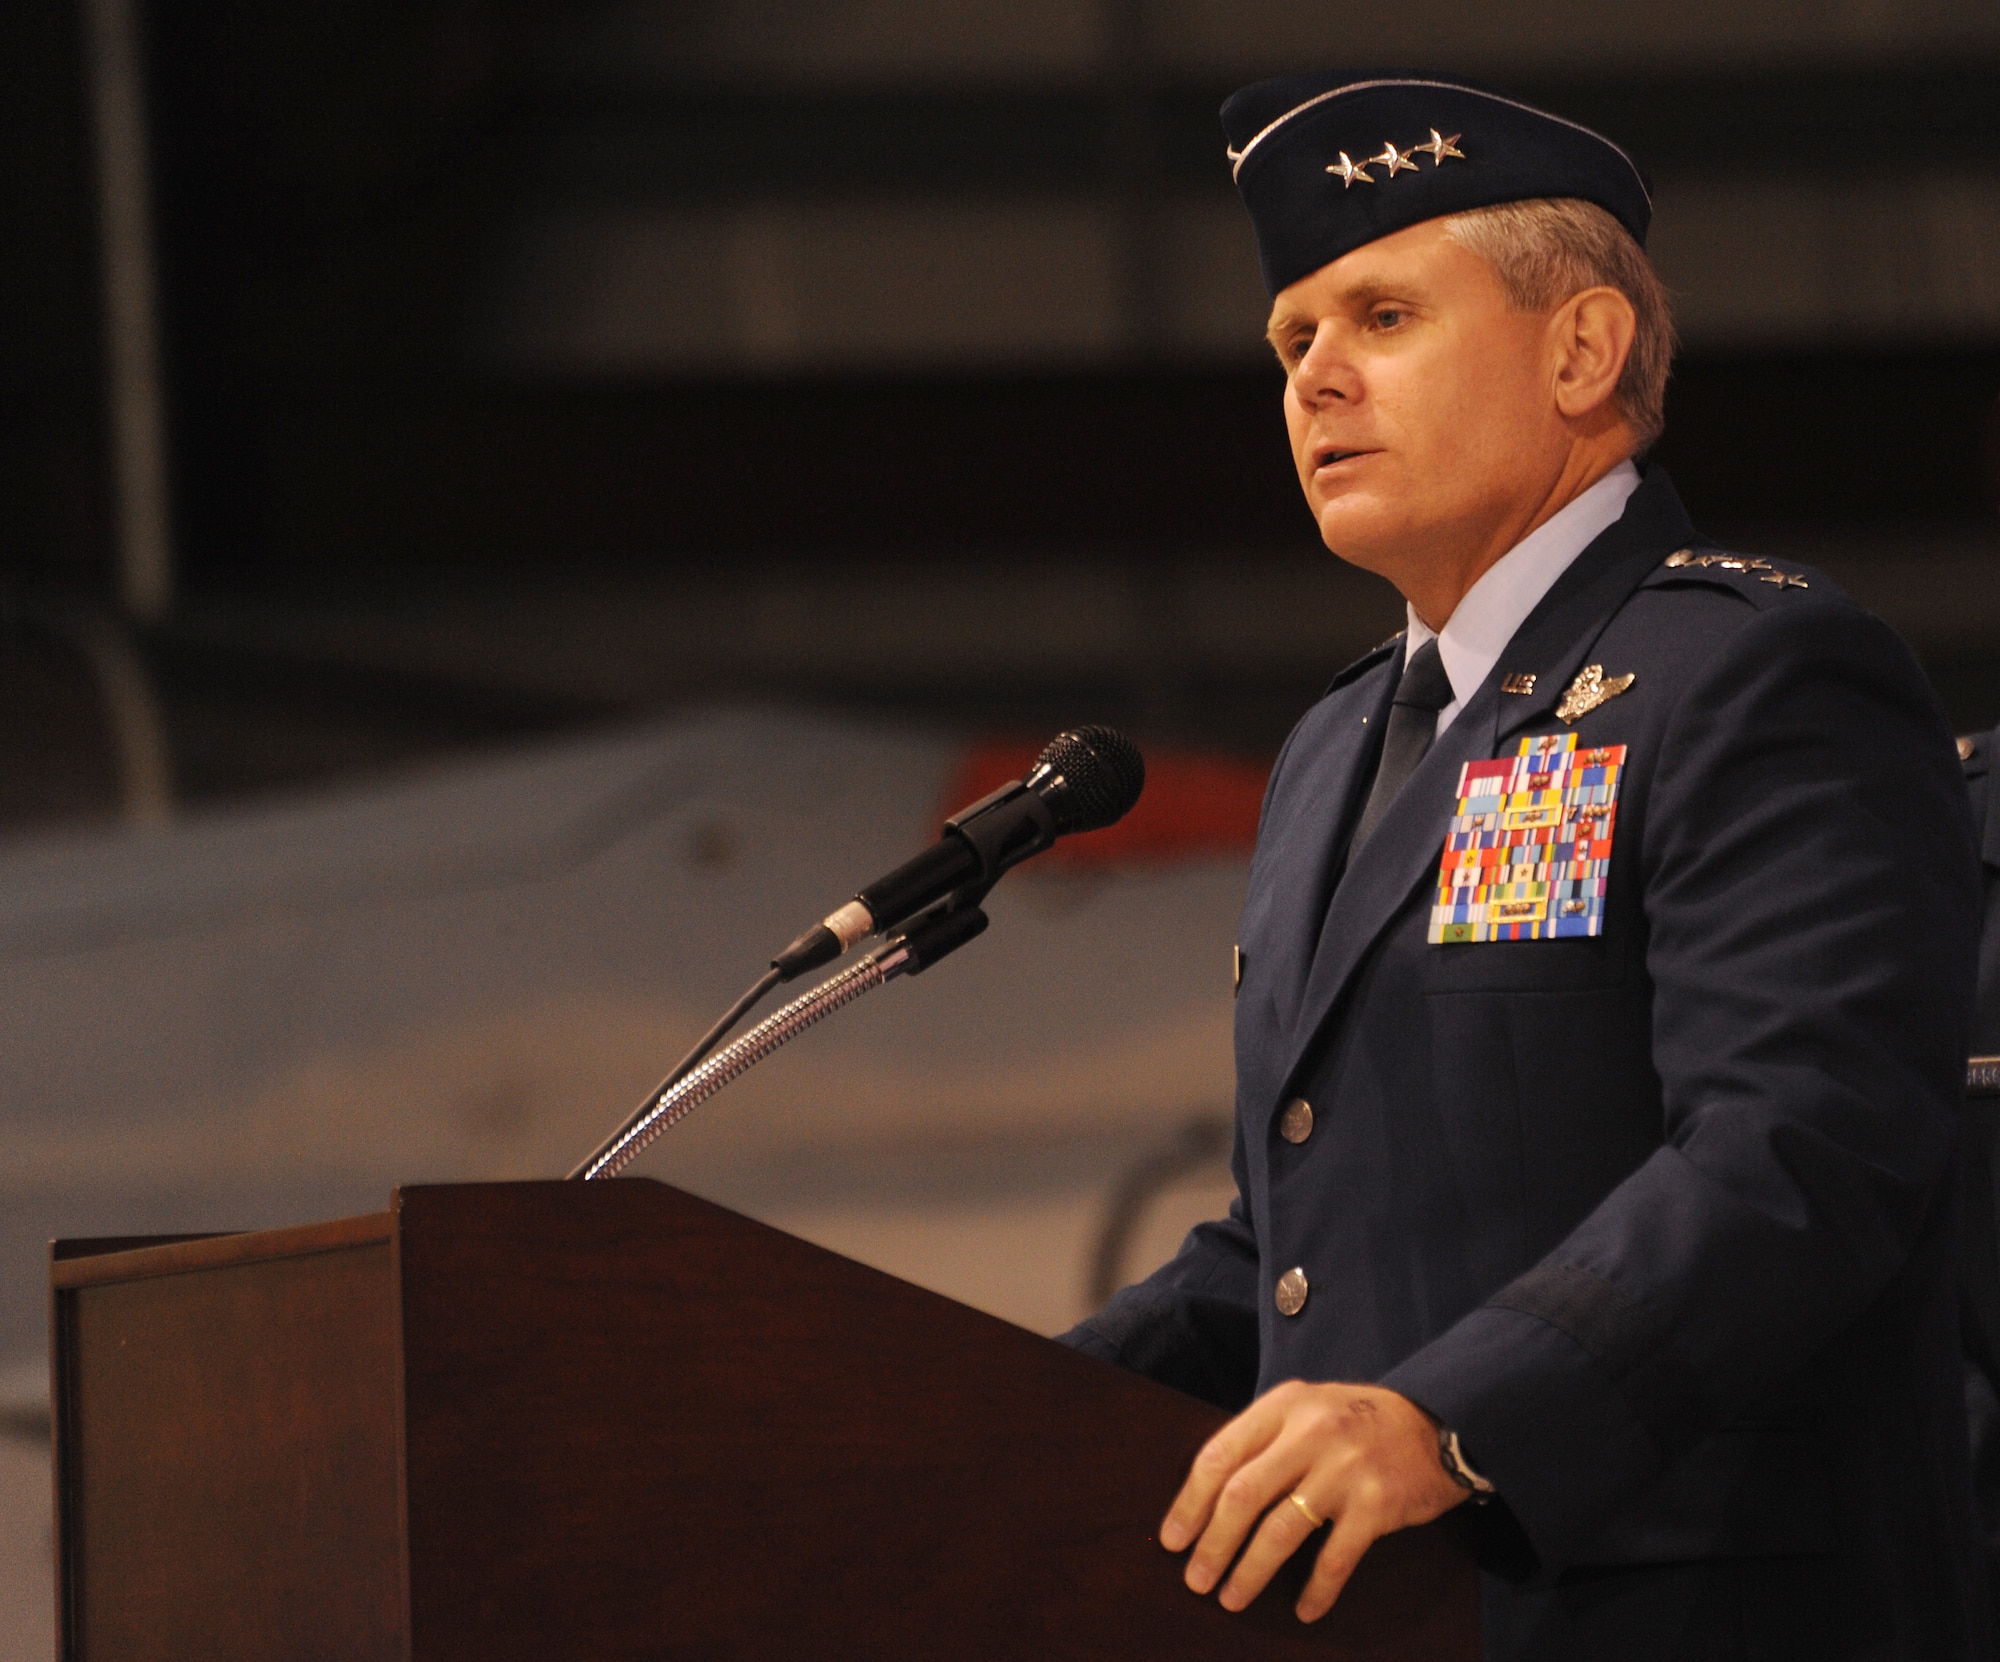 U.S. Air Force Lt. Gen. Eric E. Fiel, commander of Air Force Special Operations Command, speaks during an award ceremony held at the Portland Air National Guard Base, Portland, Ore., Jan. 23.  The event honored Airmen from the unit with five Bronze Star Medals and one Purple Heart medal.  The Airmen earned the medals during recent deployments to the Middle East. Fiel flew in from AFSOC headquarters at Hulburt Field, Fla., for the ceremony. (Oregon Air National Guard photo by Tech. Sgt. John Hughel, 142nd Fighter Wing Public Affairs/Released)